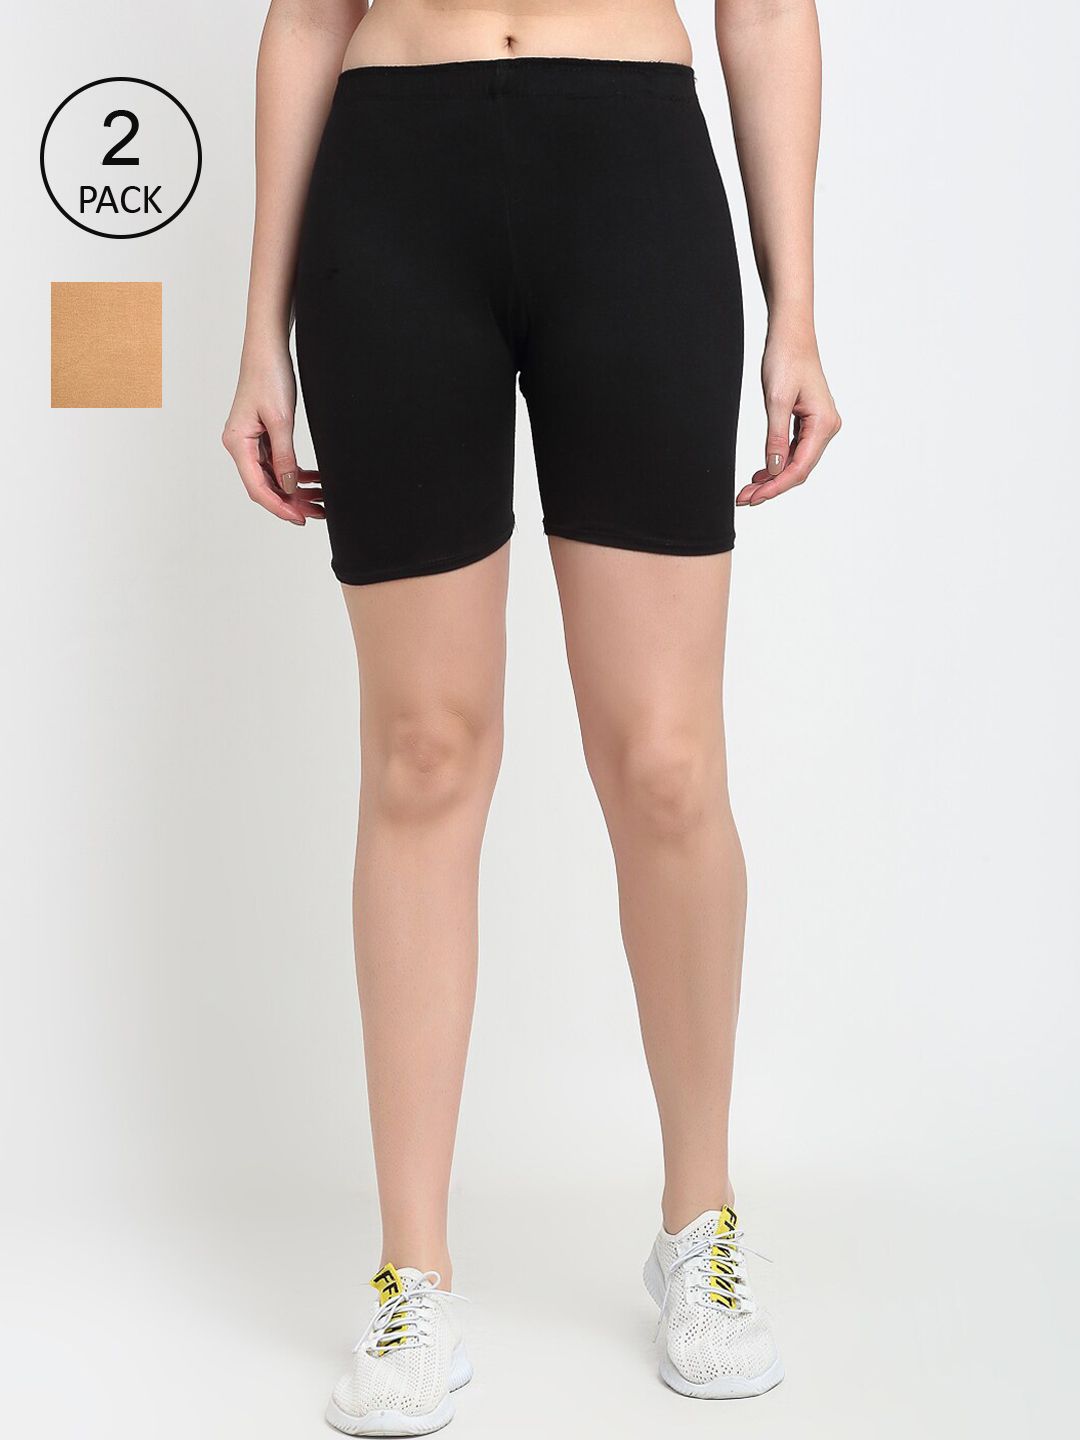 Jinfo Women Black & Beige Pack of 2 Cycling Sports Shorts Price in India